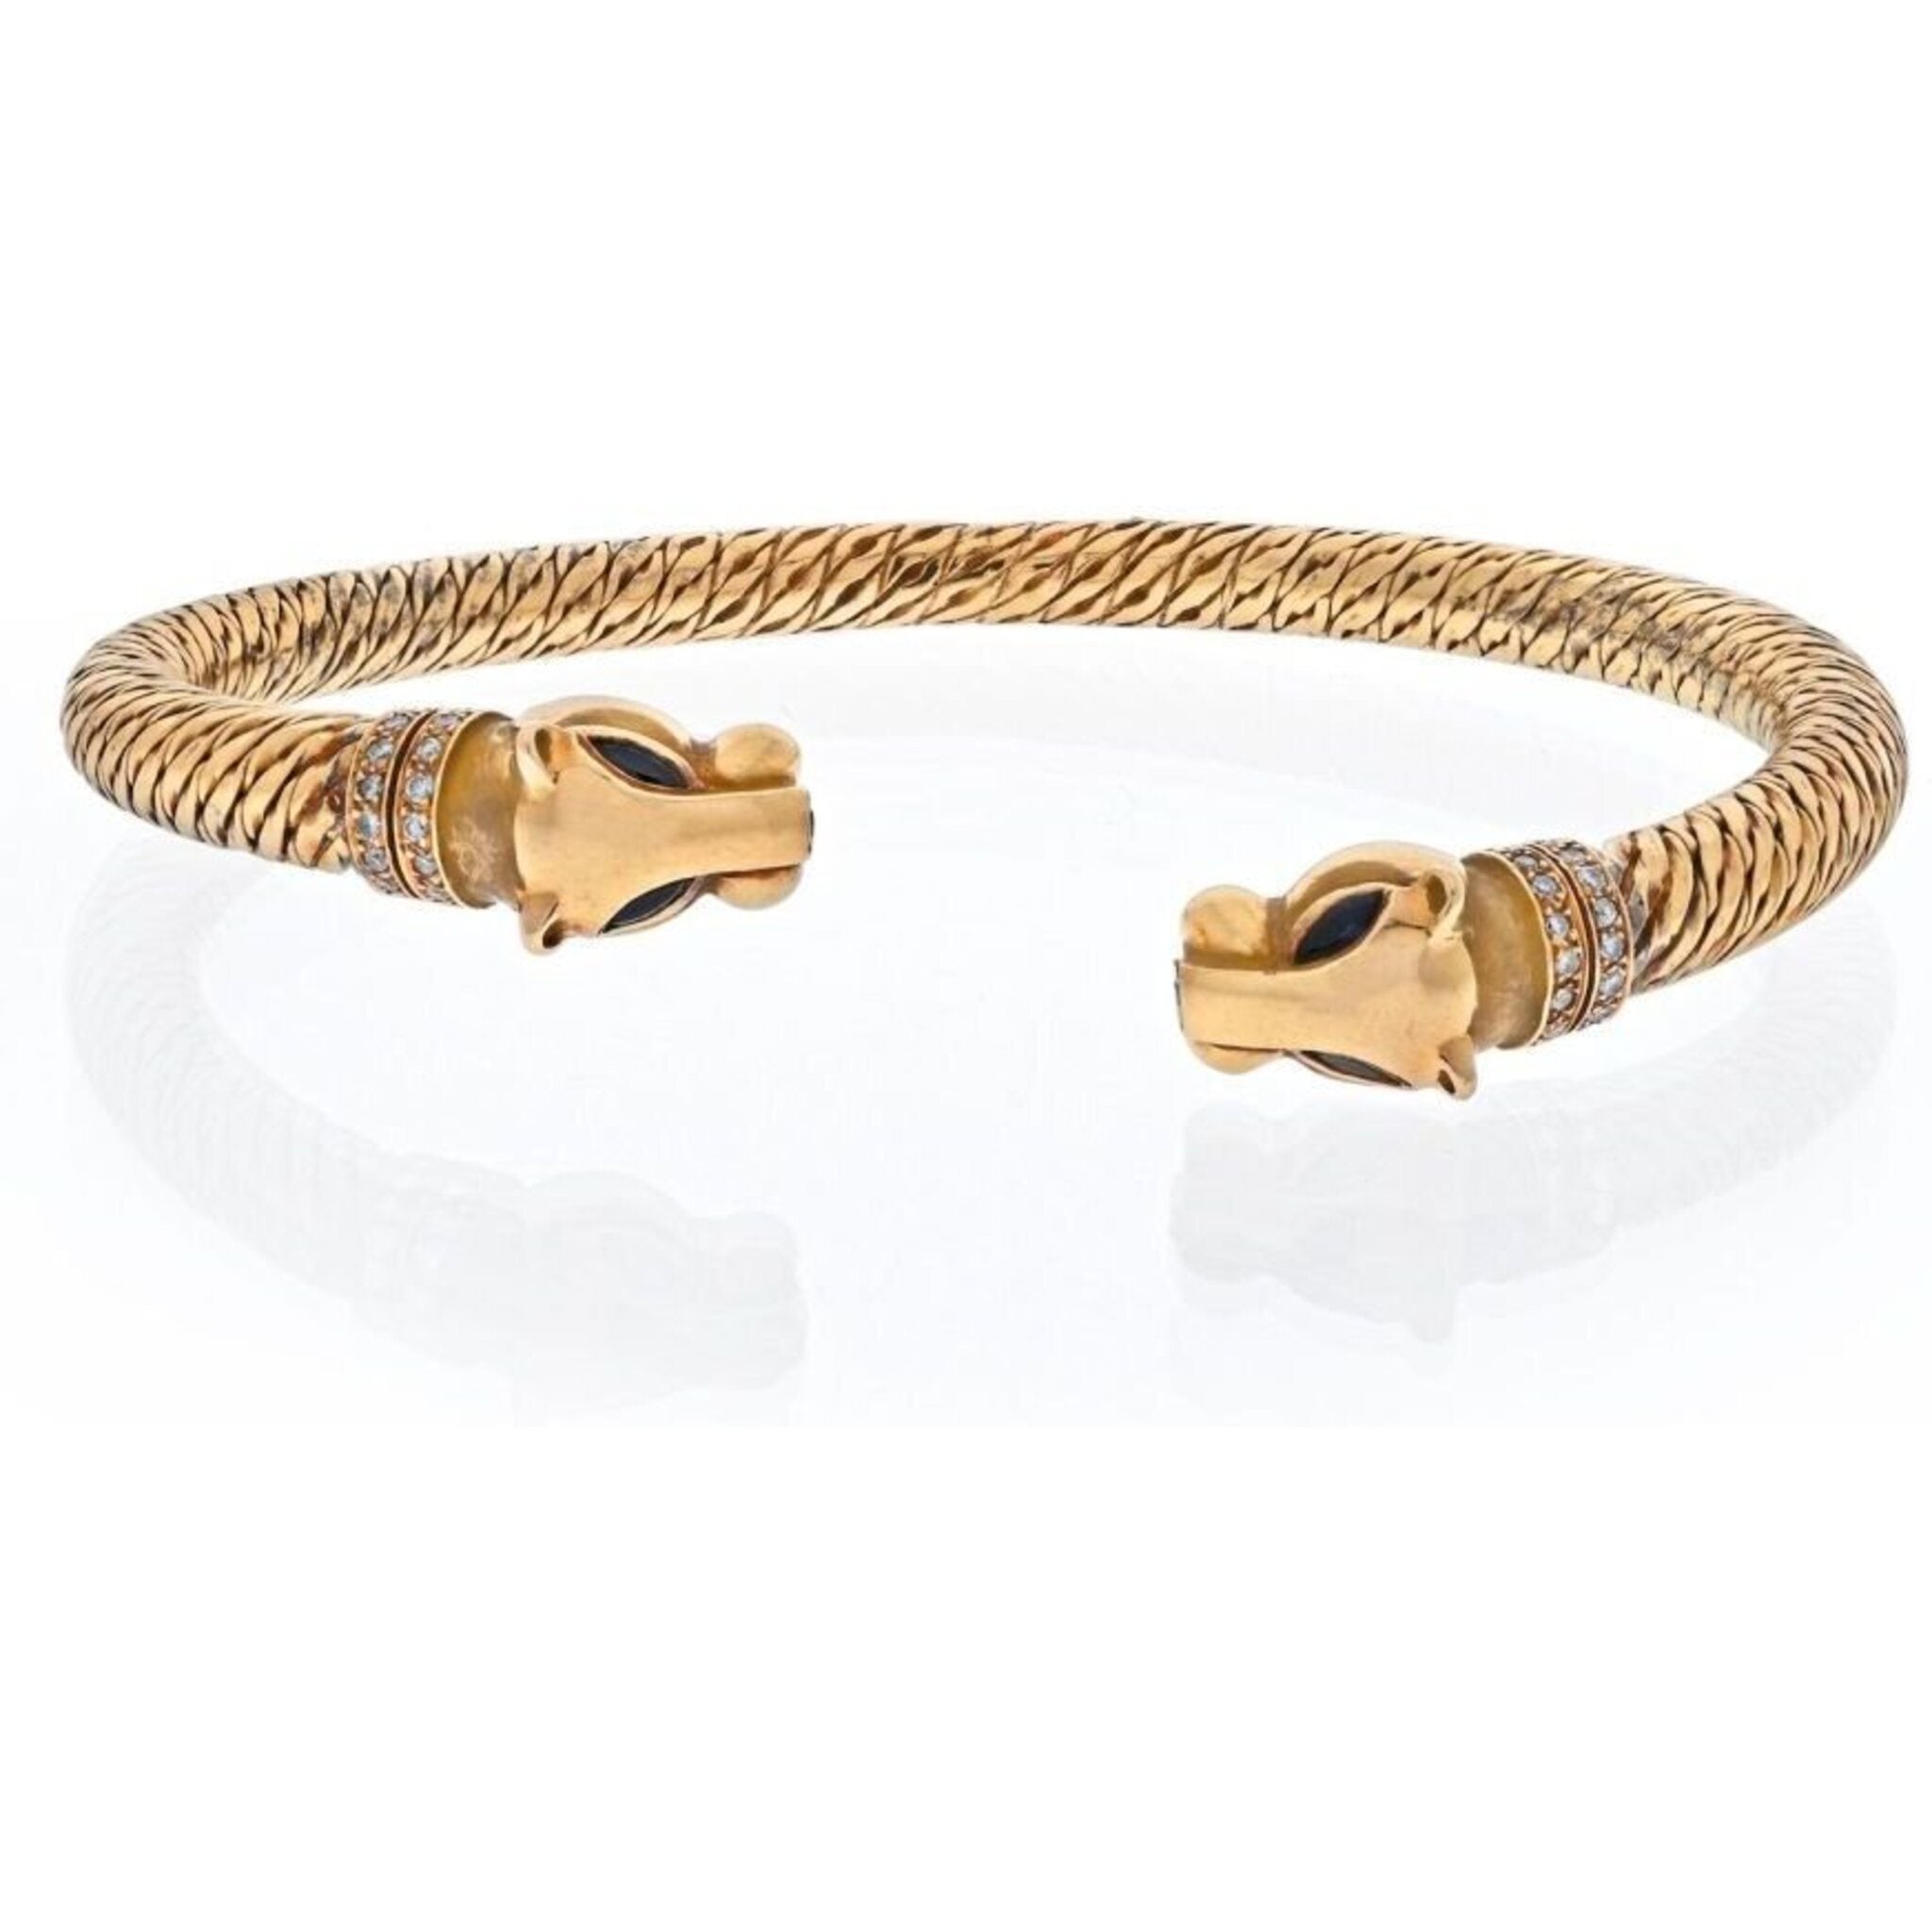 Buy Cartier 18K Goldrhodium 316L Surgical Stainless Steel Openable Kada Bangle  Bracelet For Boys Men Online at Low Prices in India - Paytmmall.com